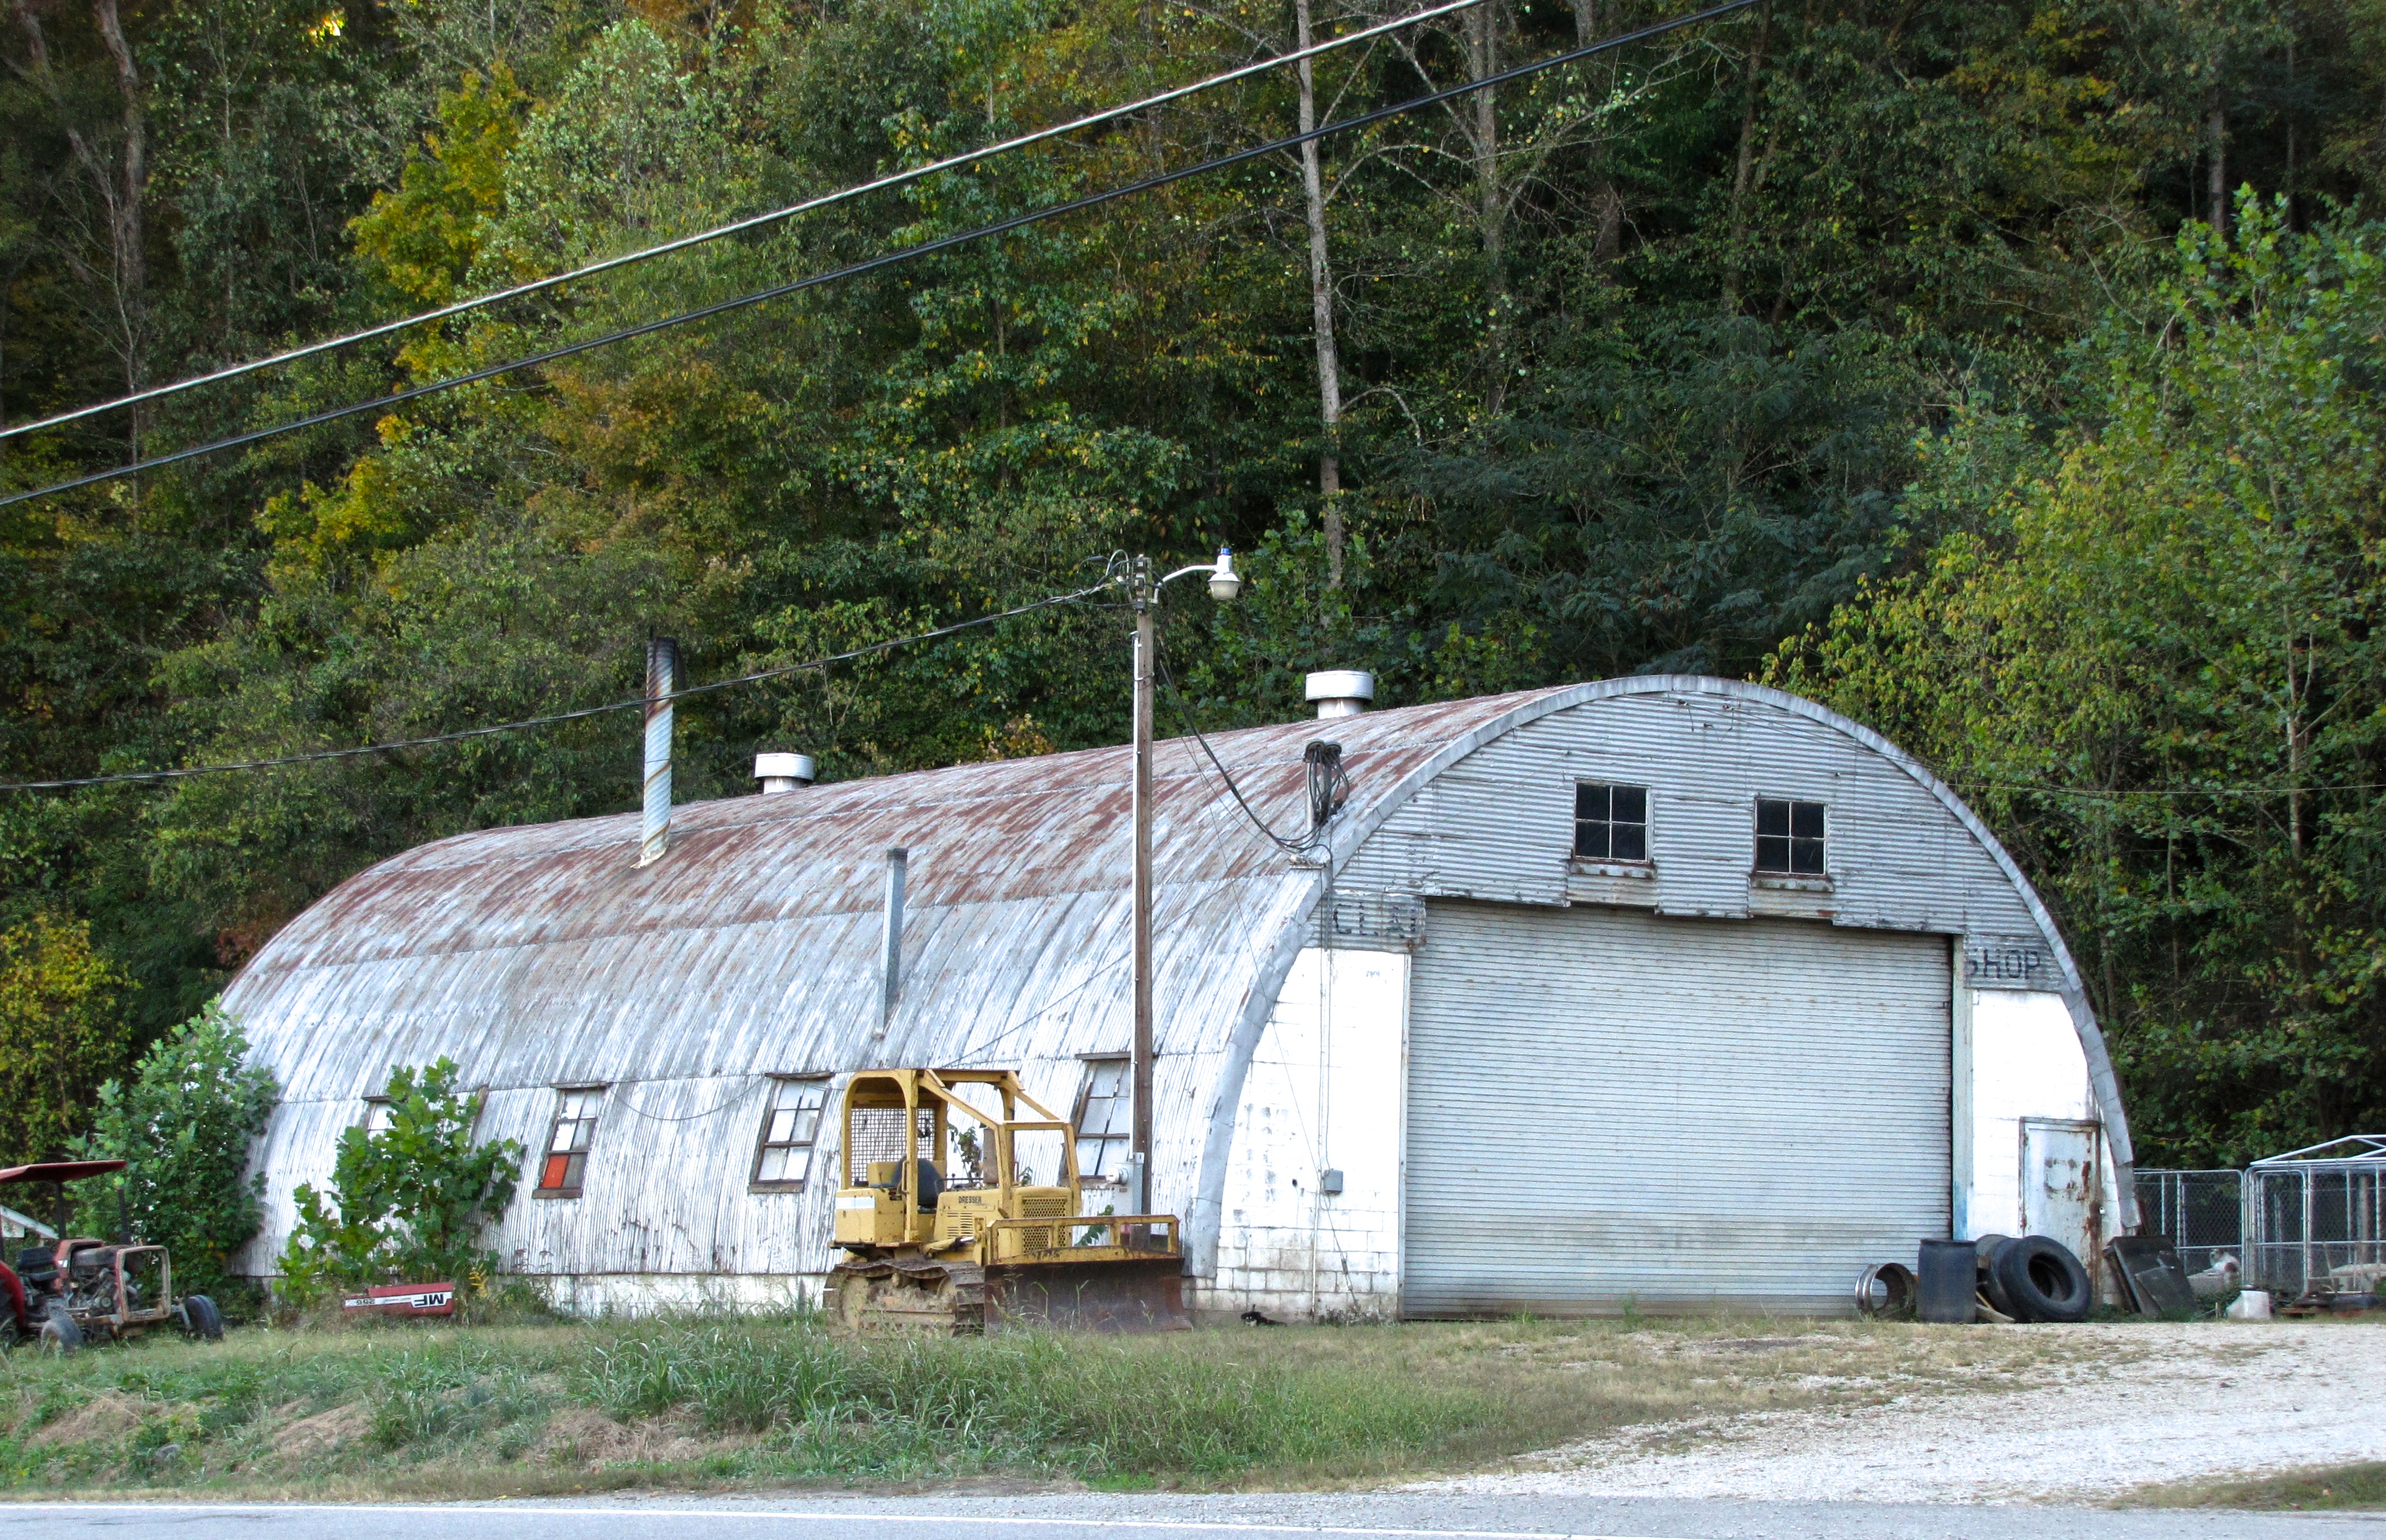 quonset hut in Hereford, TX